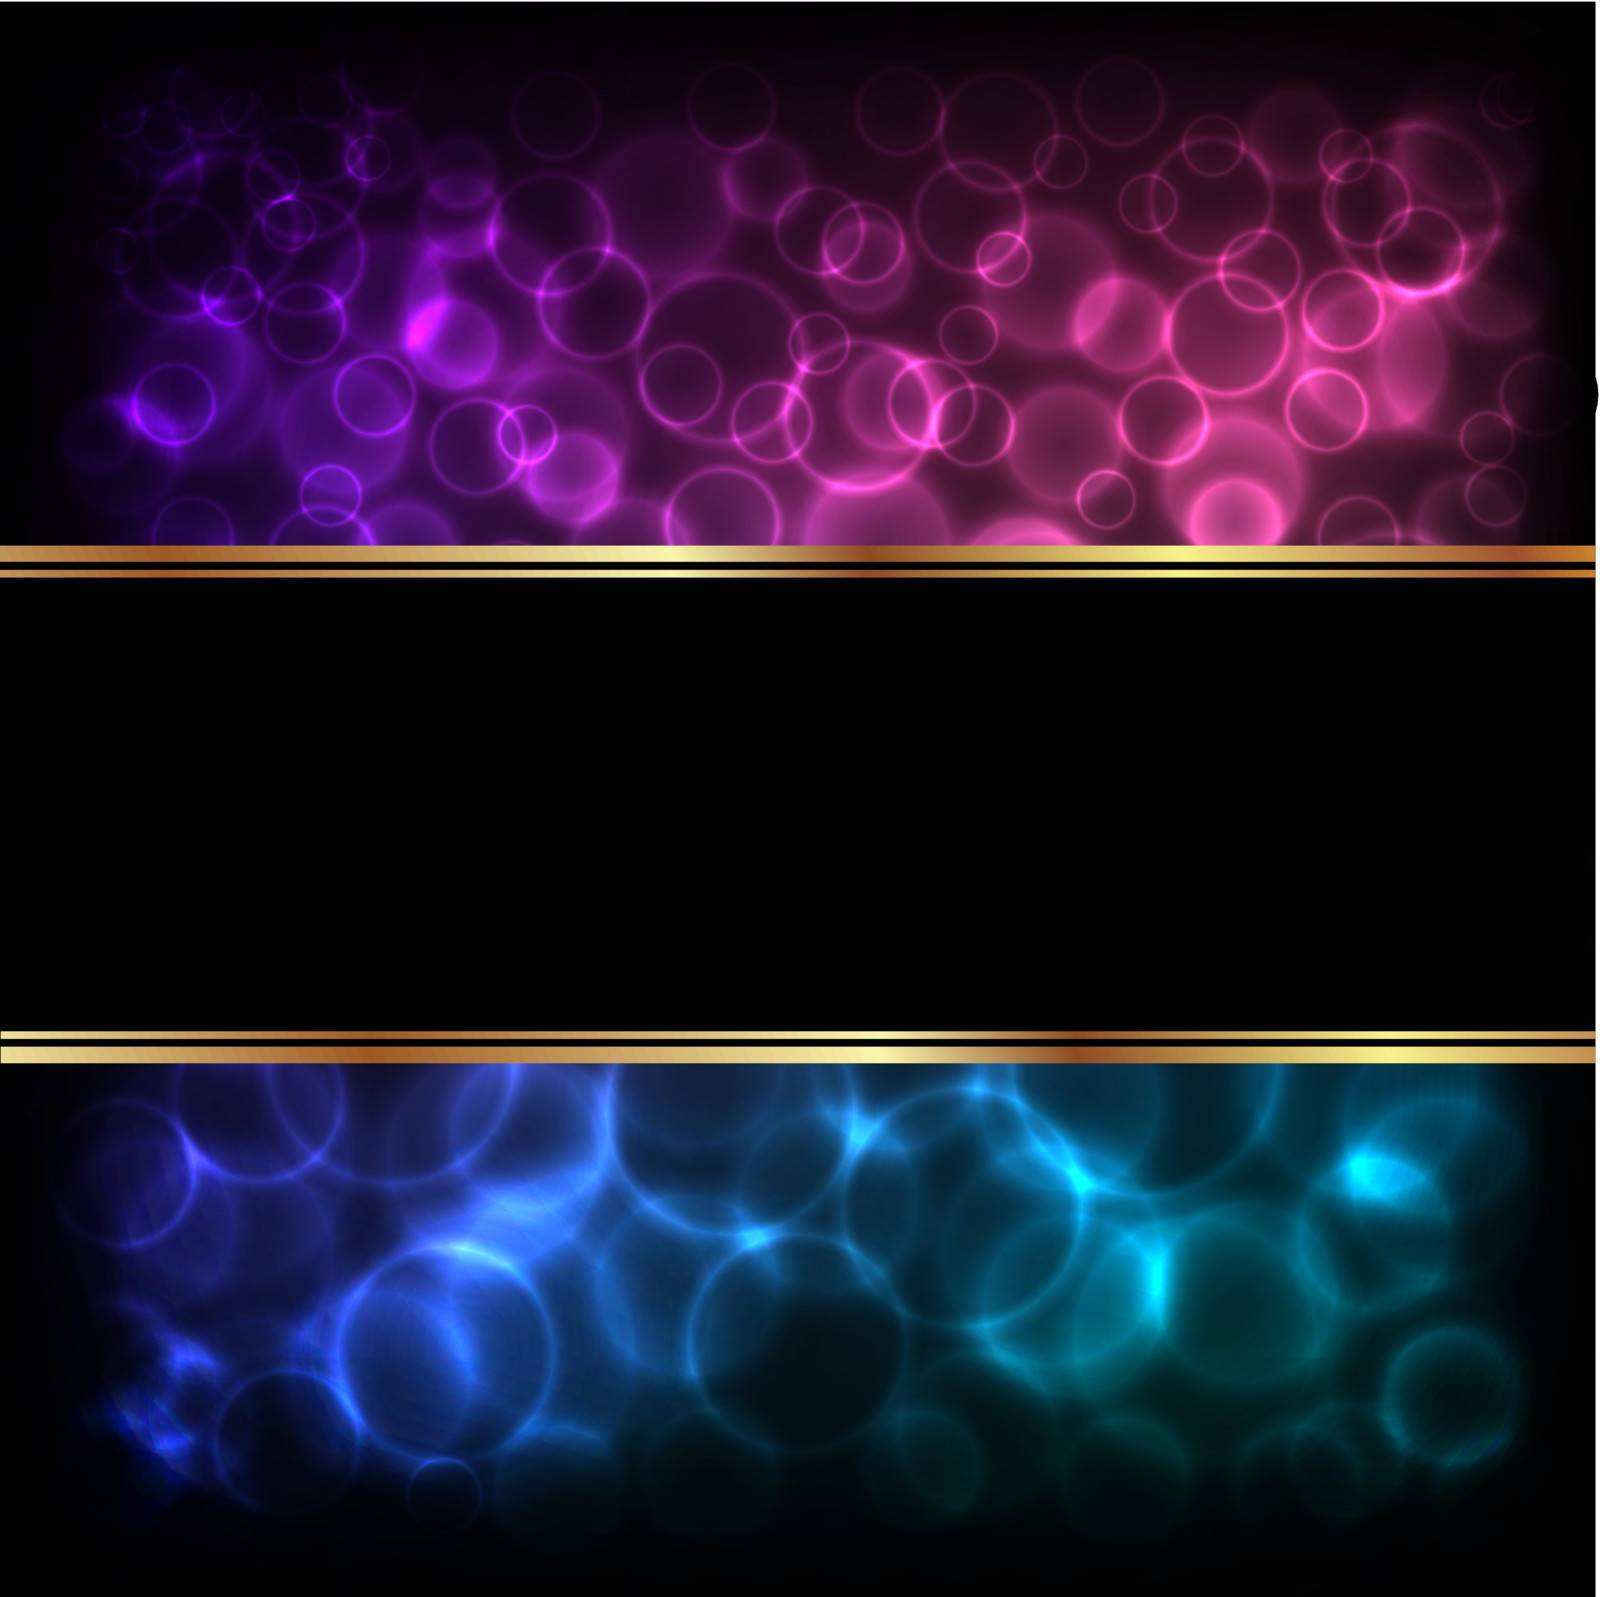 Abstract of bokeh over dark background with text banner. Vector illustration.